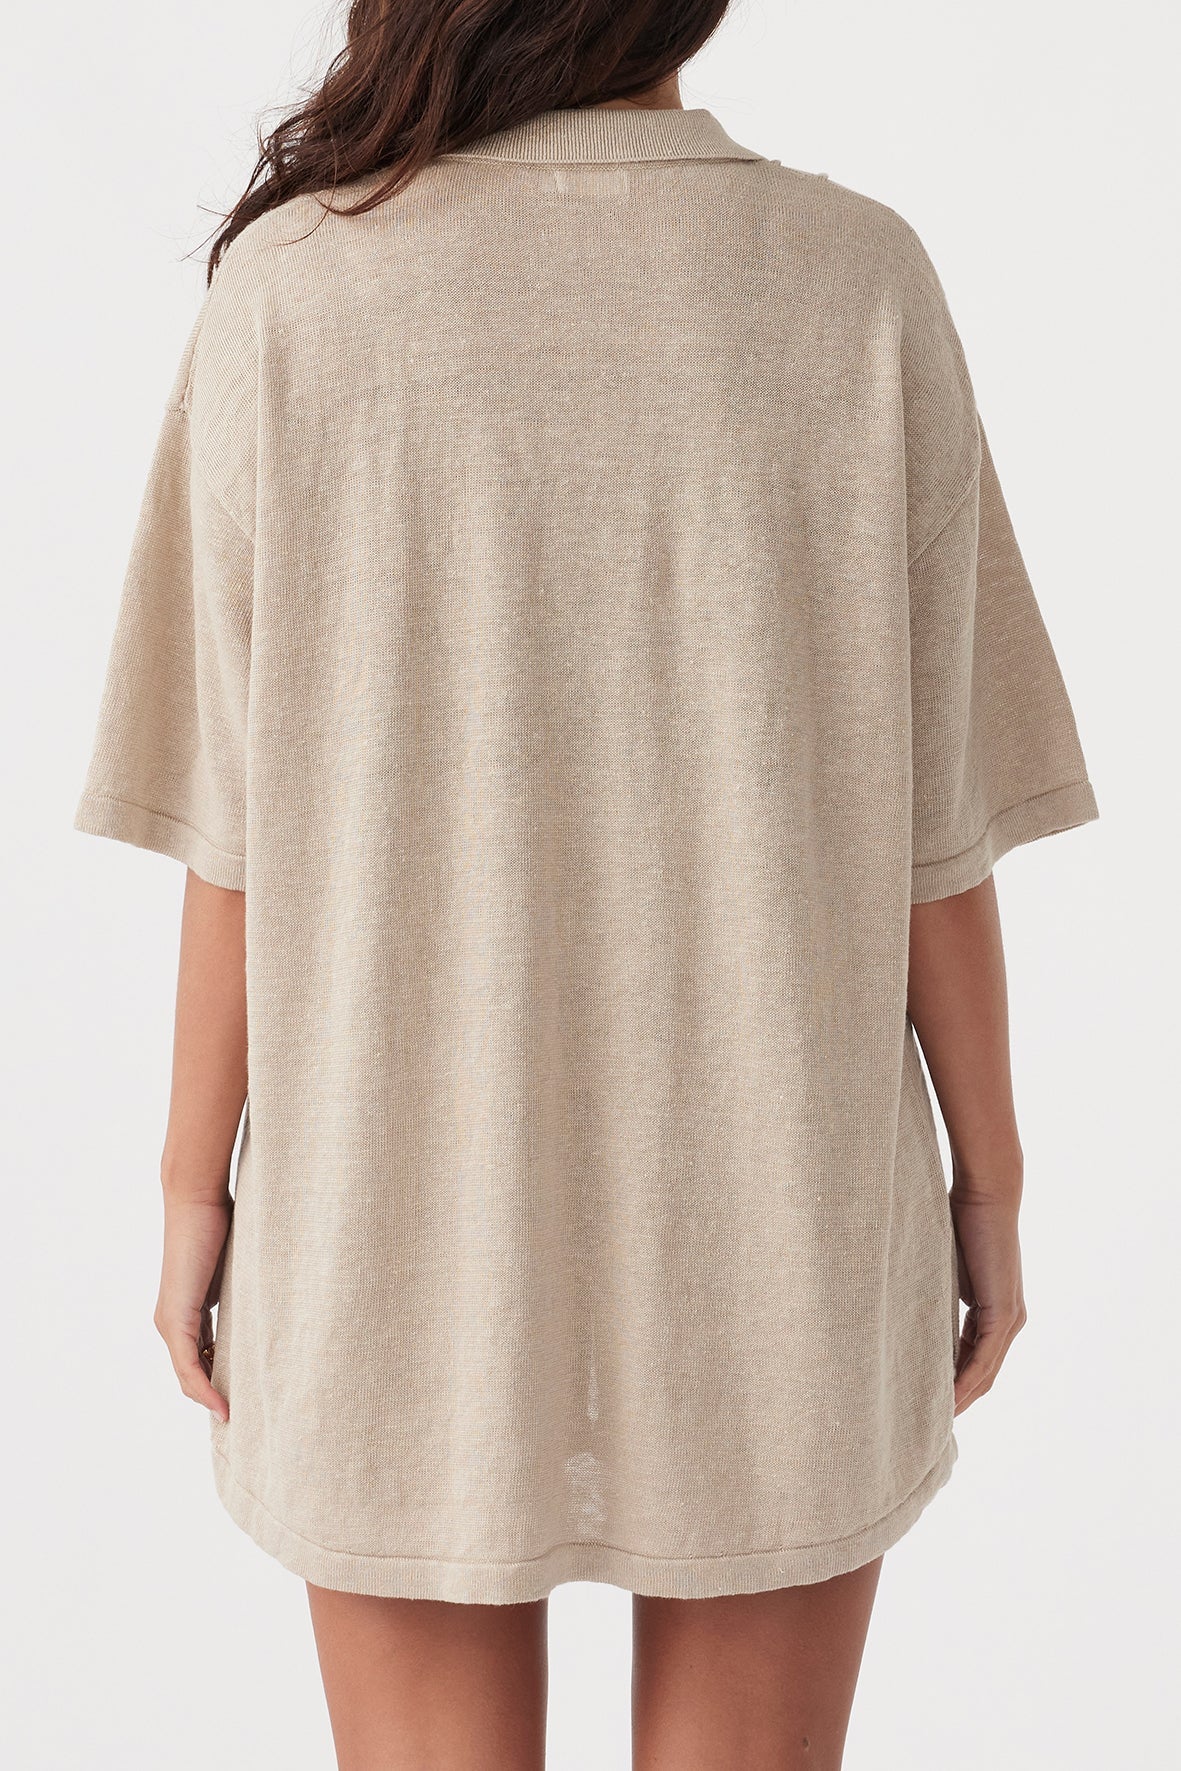 Darcy Shirt- Taupe